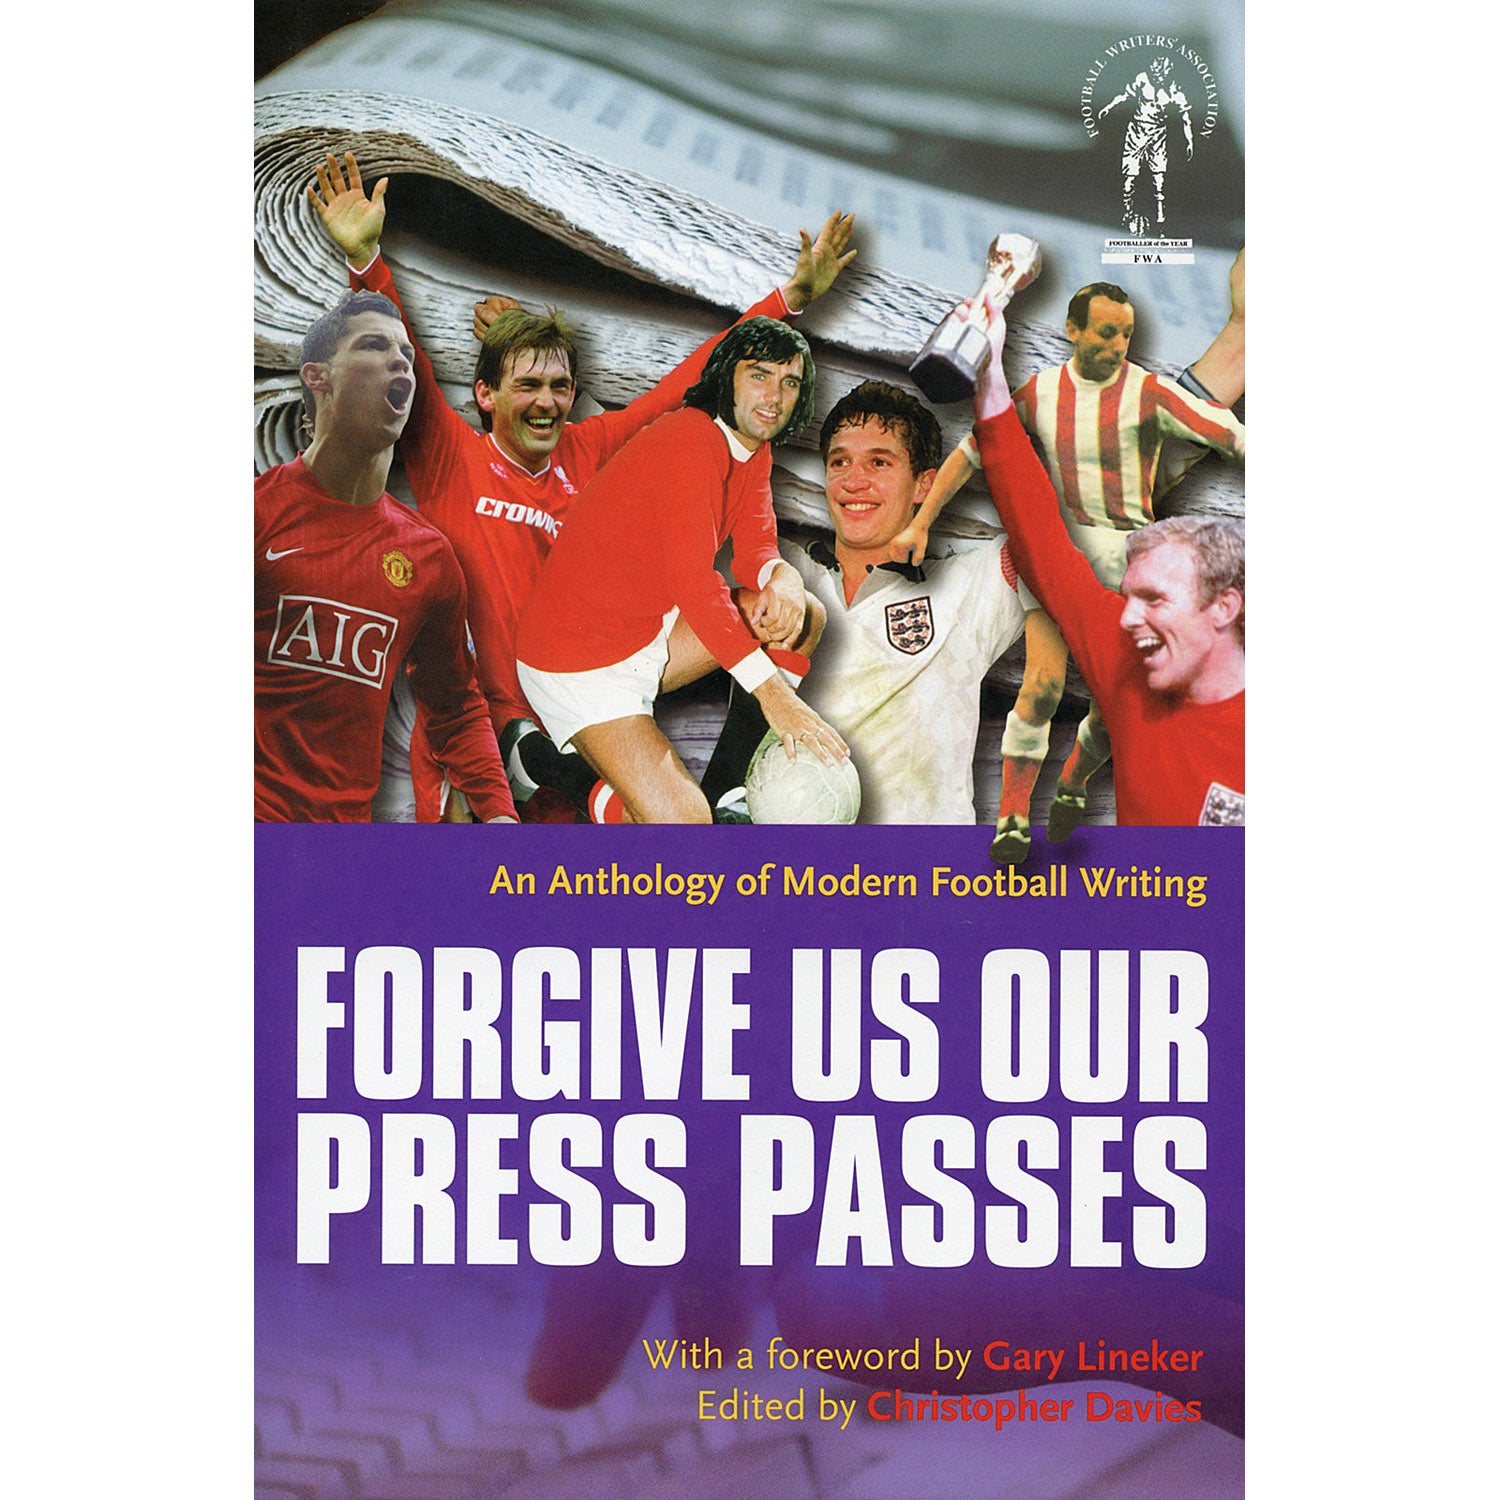 Forgive Us Our Press Passes – An Anthology of Modern Football Writing